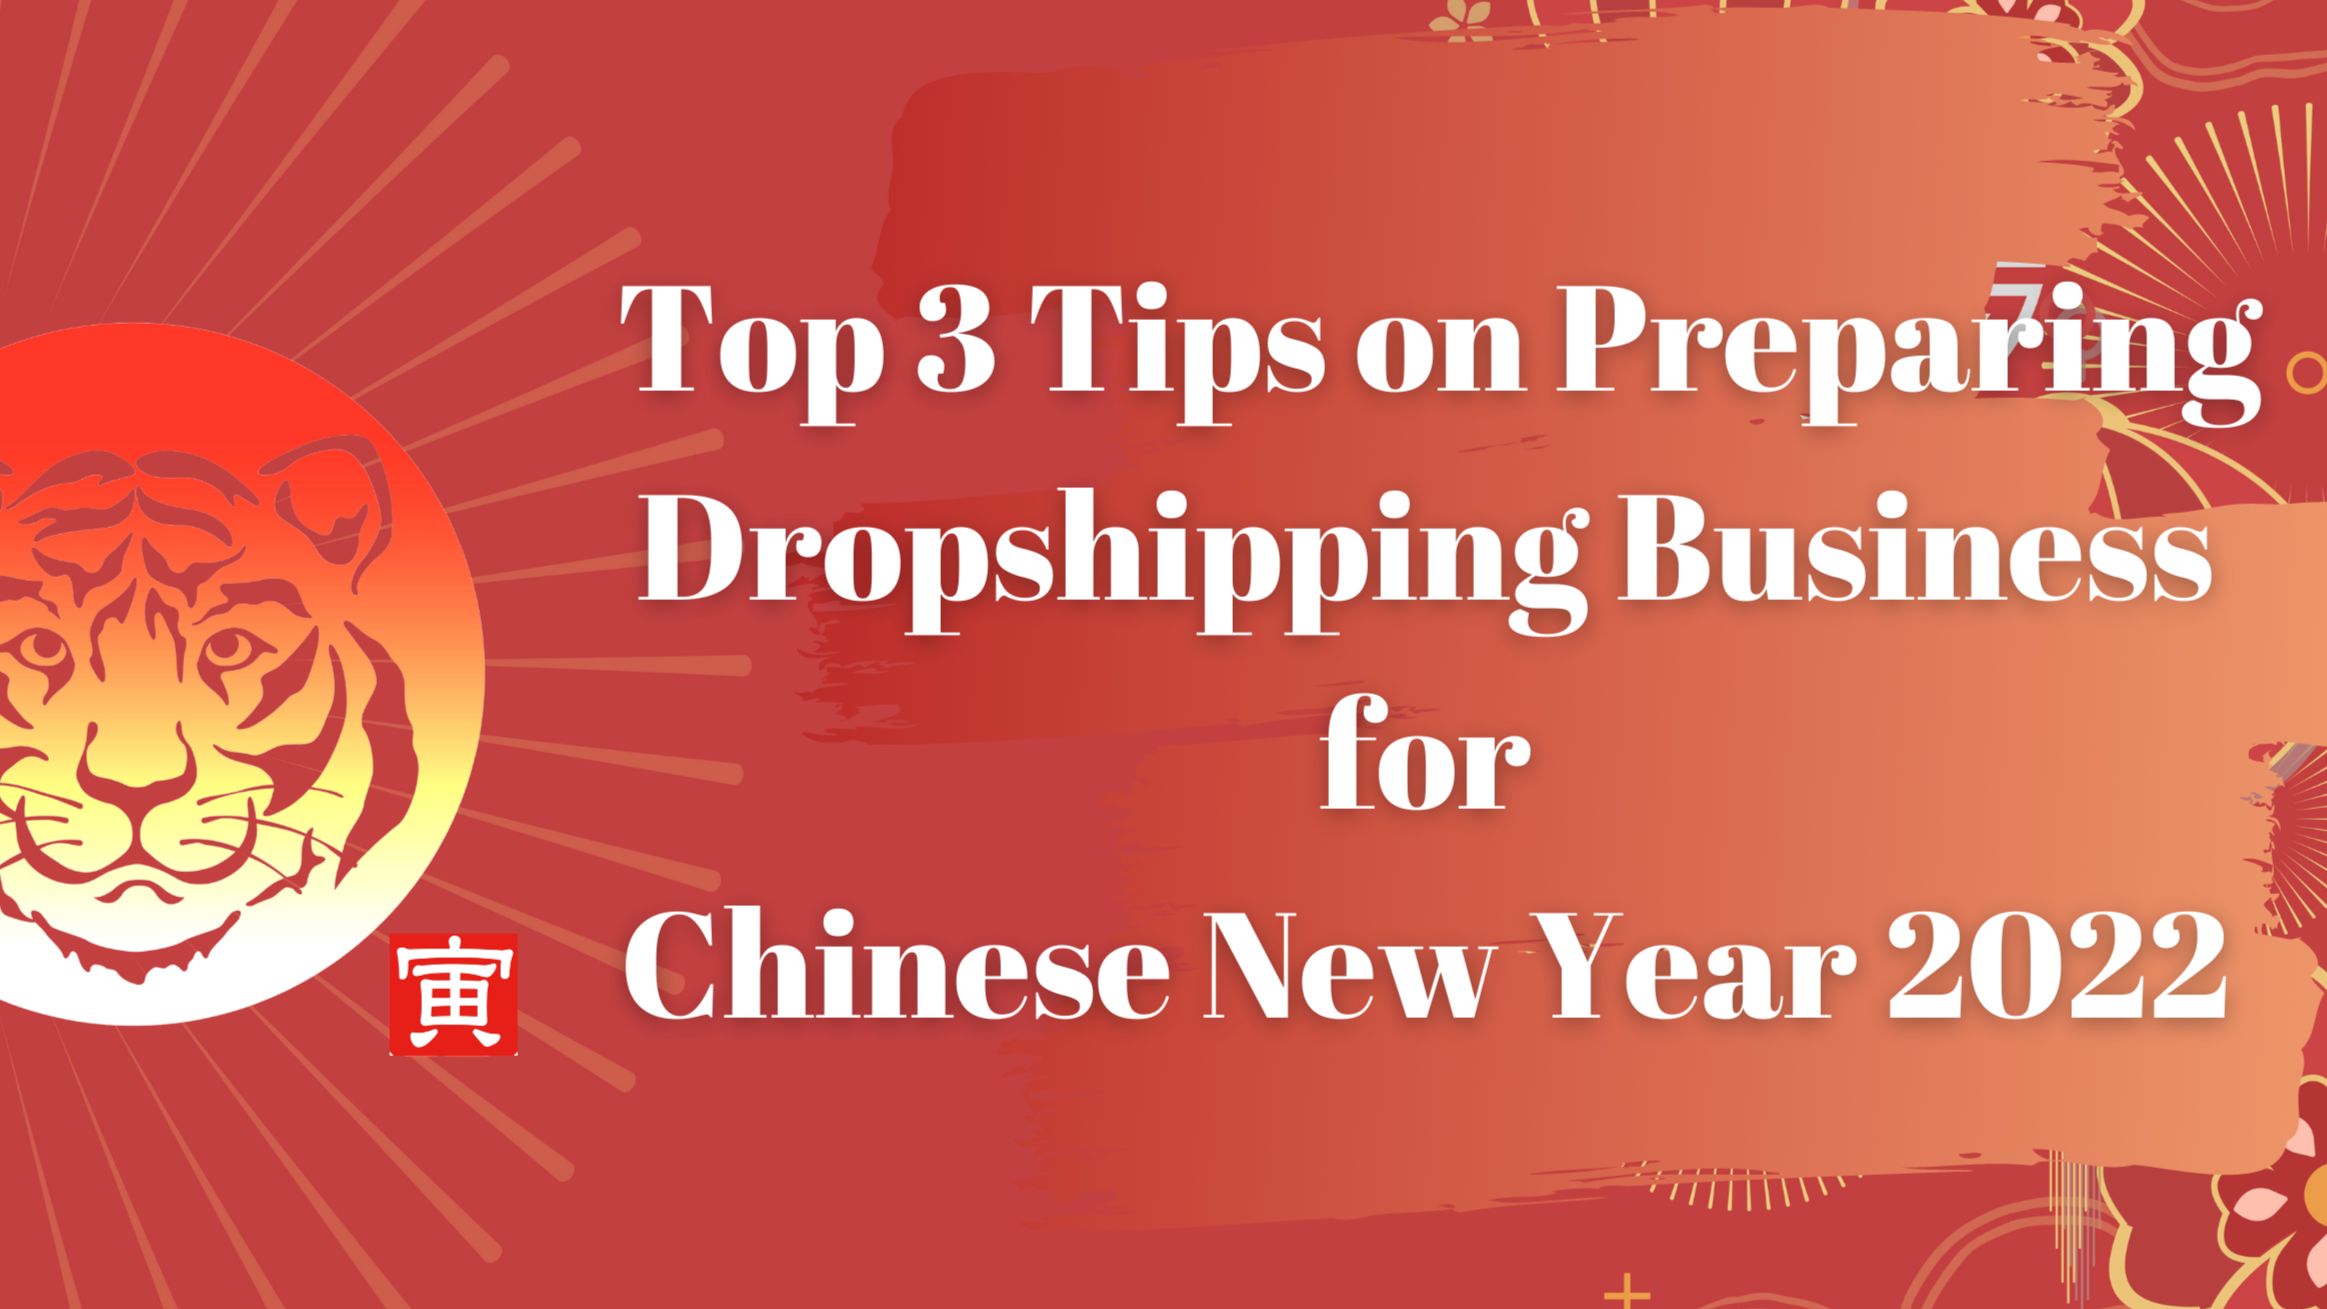 15 Best Dropshipping Suppliers USA in 2022 - Dropshipping Business Tips